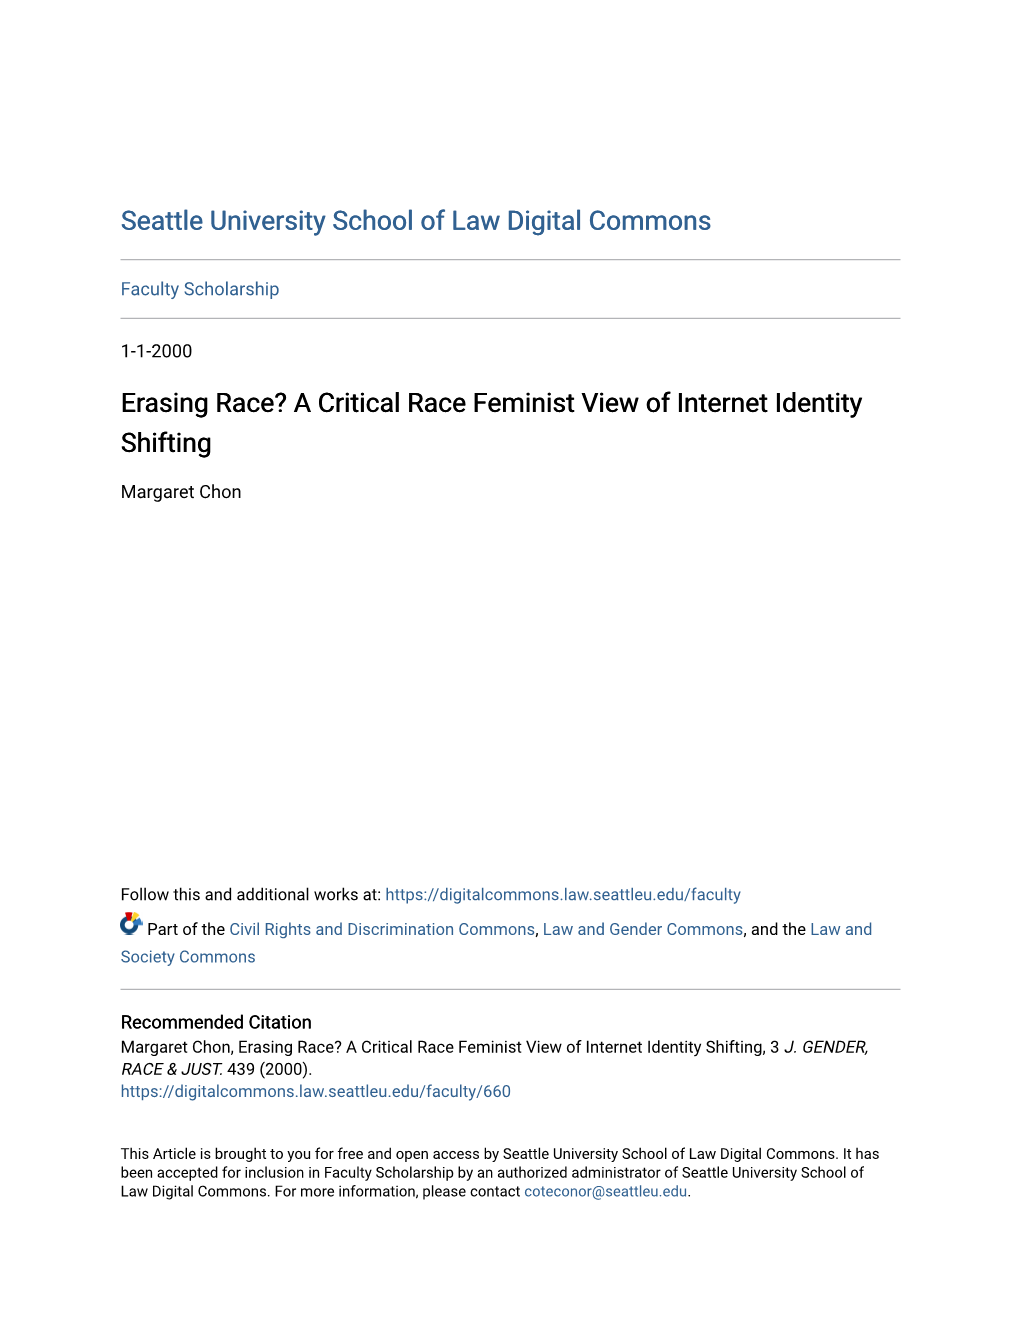 A Critical Race Feminist View of Internet Identity Shifting